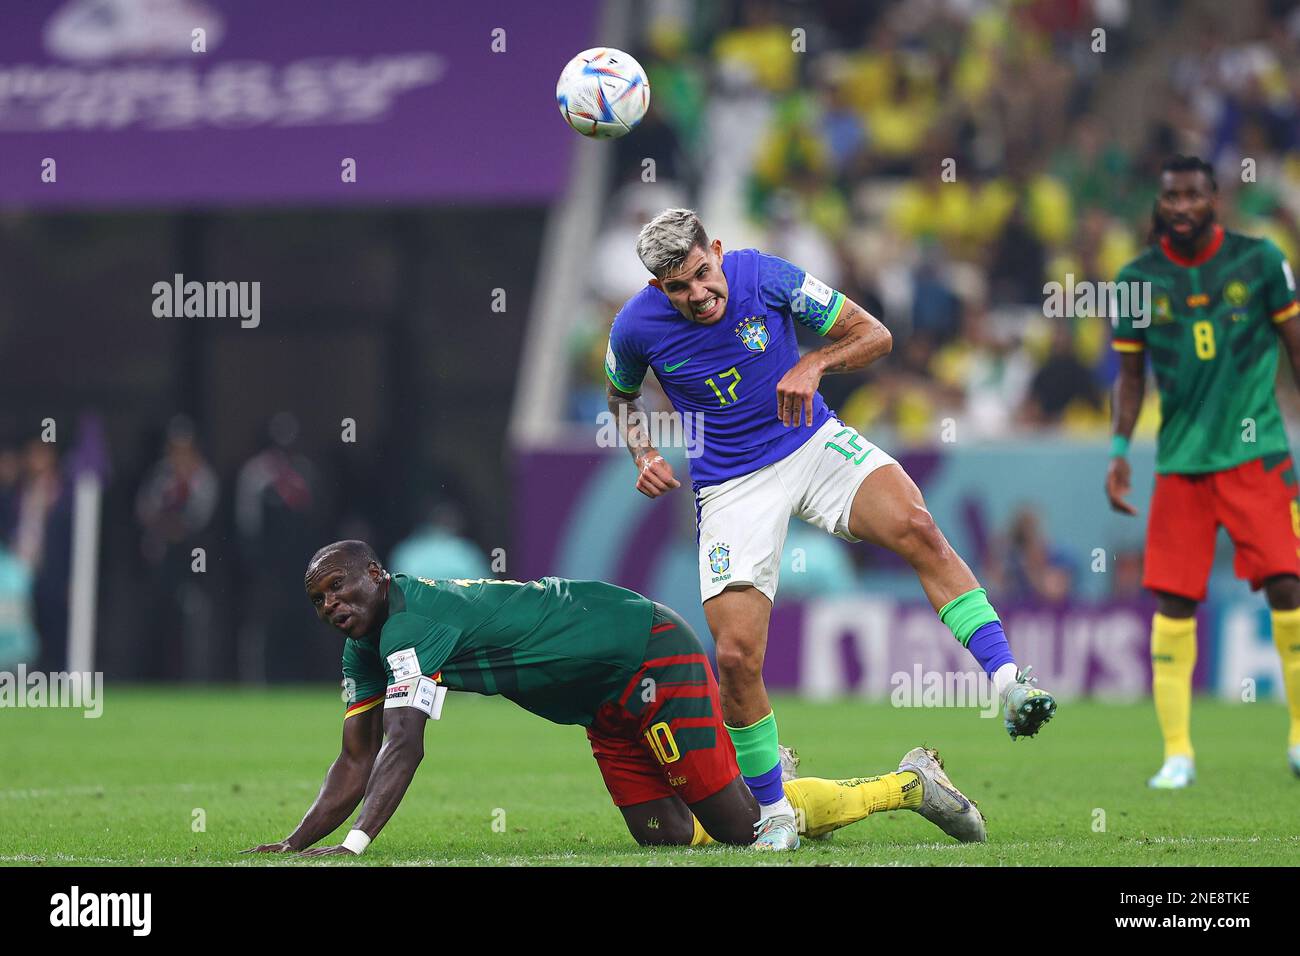 LUSAIL CITY, QATAR - DECEMBER 02: Bruno Guimaraes  during the FIFA World Cup Qatar 2022 Group G match between Cameroon and Brazil at Lusail Stadium on December 02, 2022 in Lusail City, Qatar. (Photo by MB Media) Stock Photo